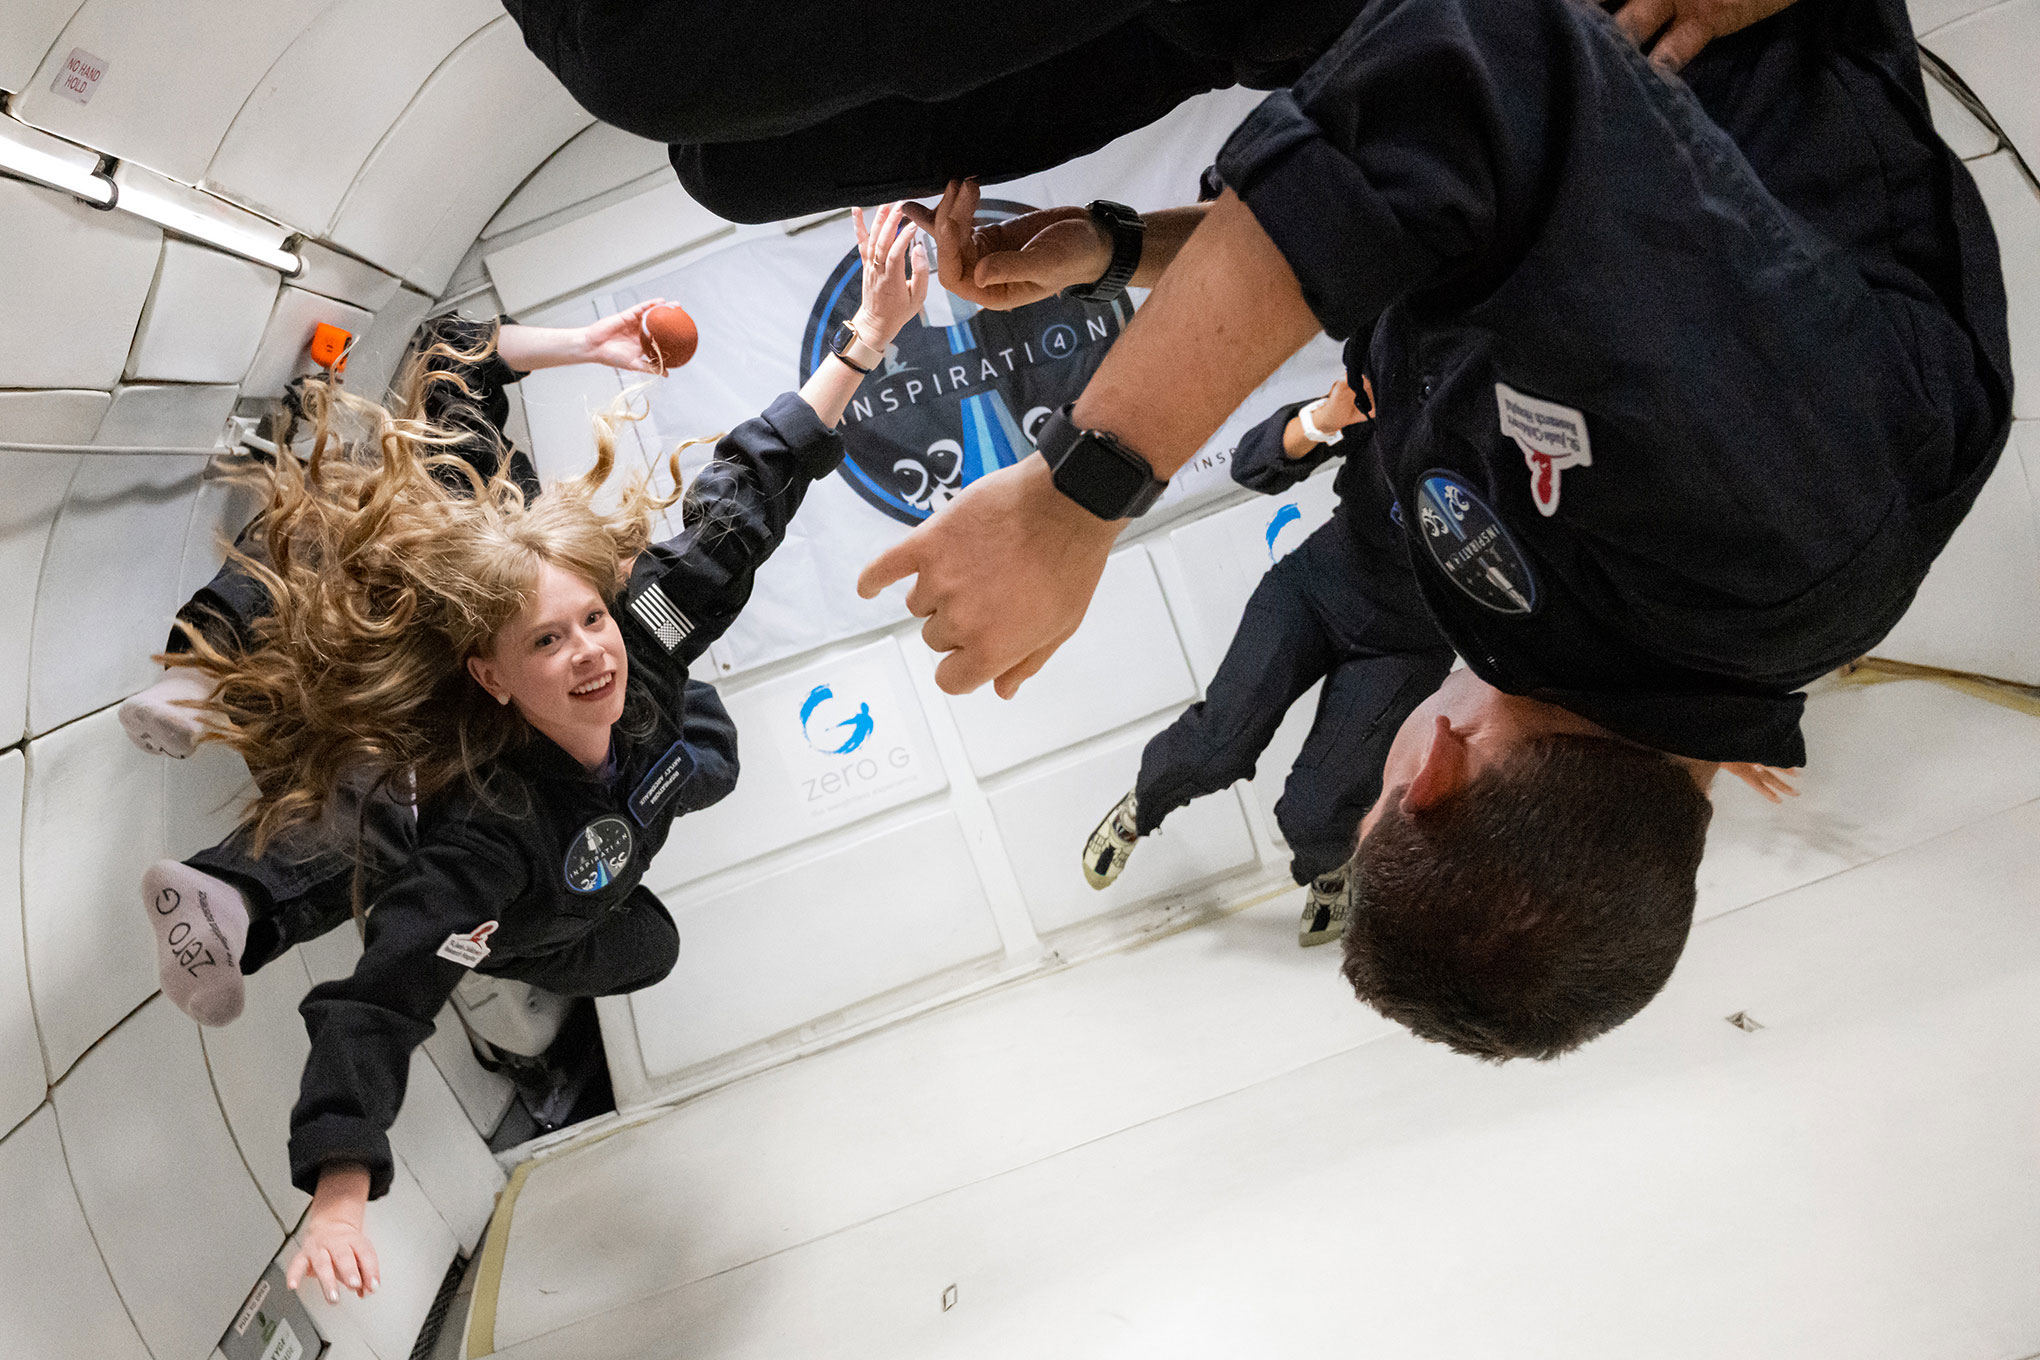 Hayley Arceneaux (left) and the rest of the Inspiration4 crew on a ZERO-G flight in Las Vegas on July 11, 2021. The plane flies in parabolic arcs to simulate zero gravity. (John Kraus—Inspiration4)